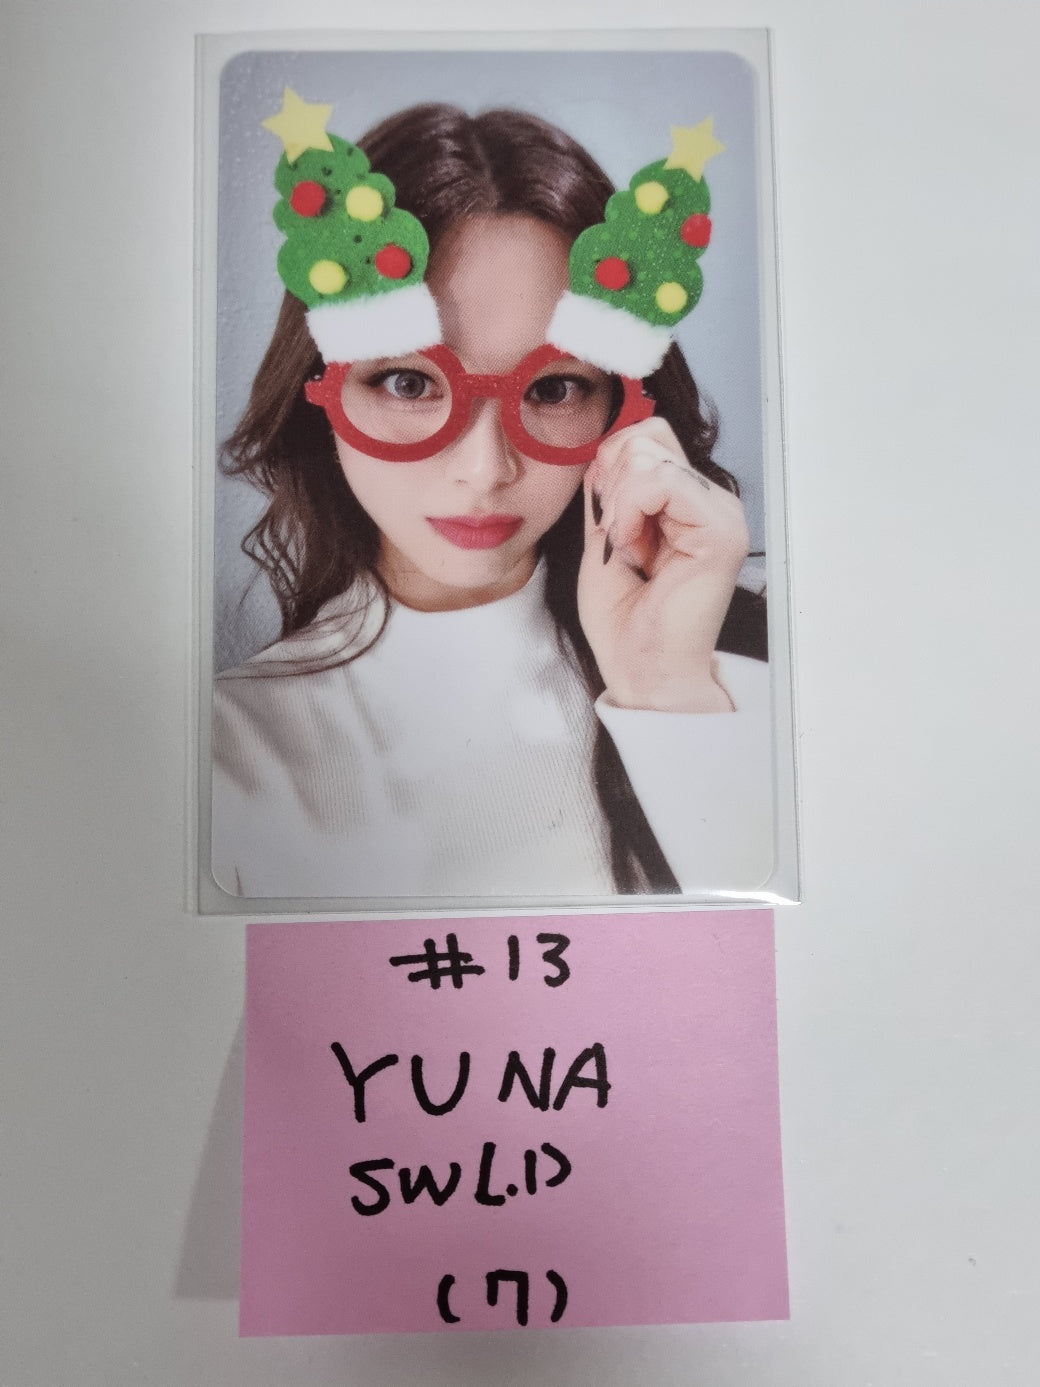 ITZY 'CHESHIRE' - Soundwave Lucky Draw Event PVC Photocard [Special Edition Ver.]